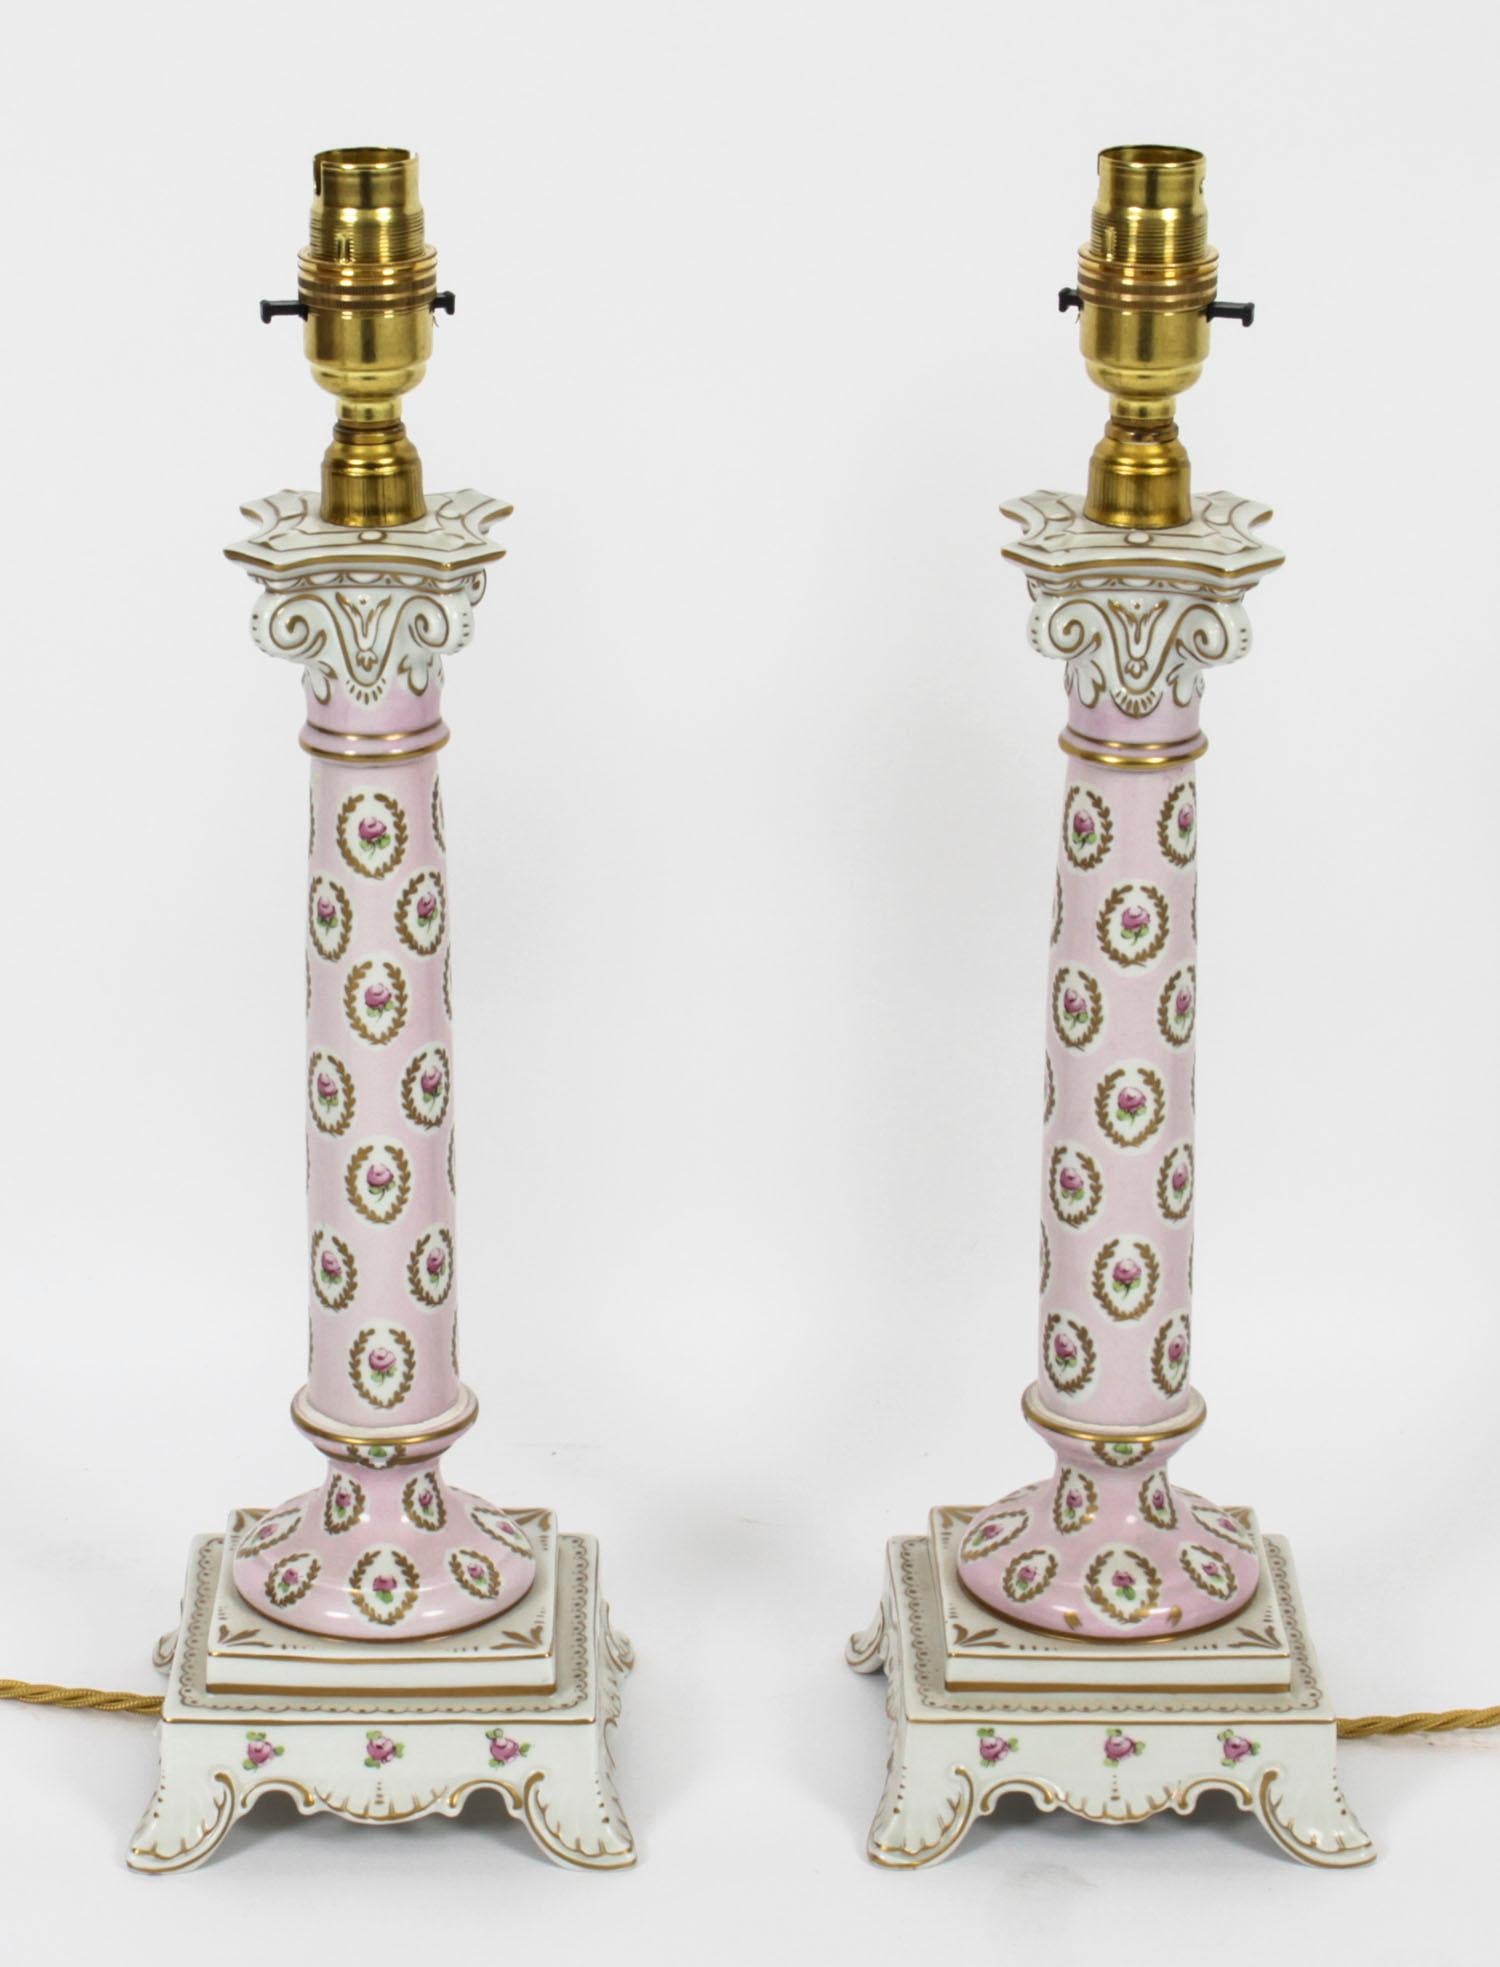 This is a beautiful vintage pair of Dresden porcelain electric table lamps, of candlestick form, the columns decorated with roses within gilt wreath on a pink ground, with leaf pattern feet and dating from the mid 20th century.

They are a